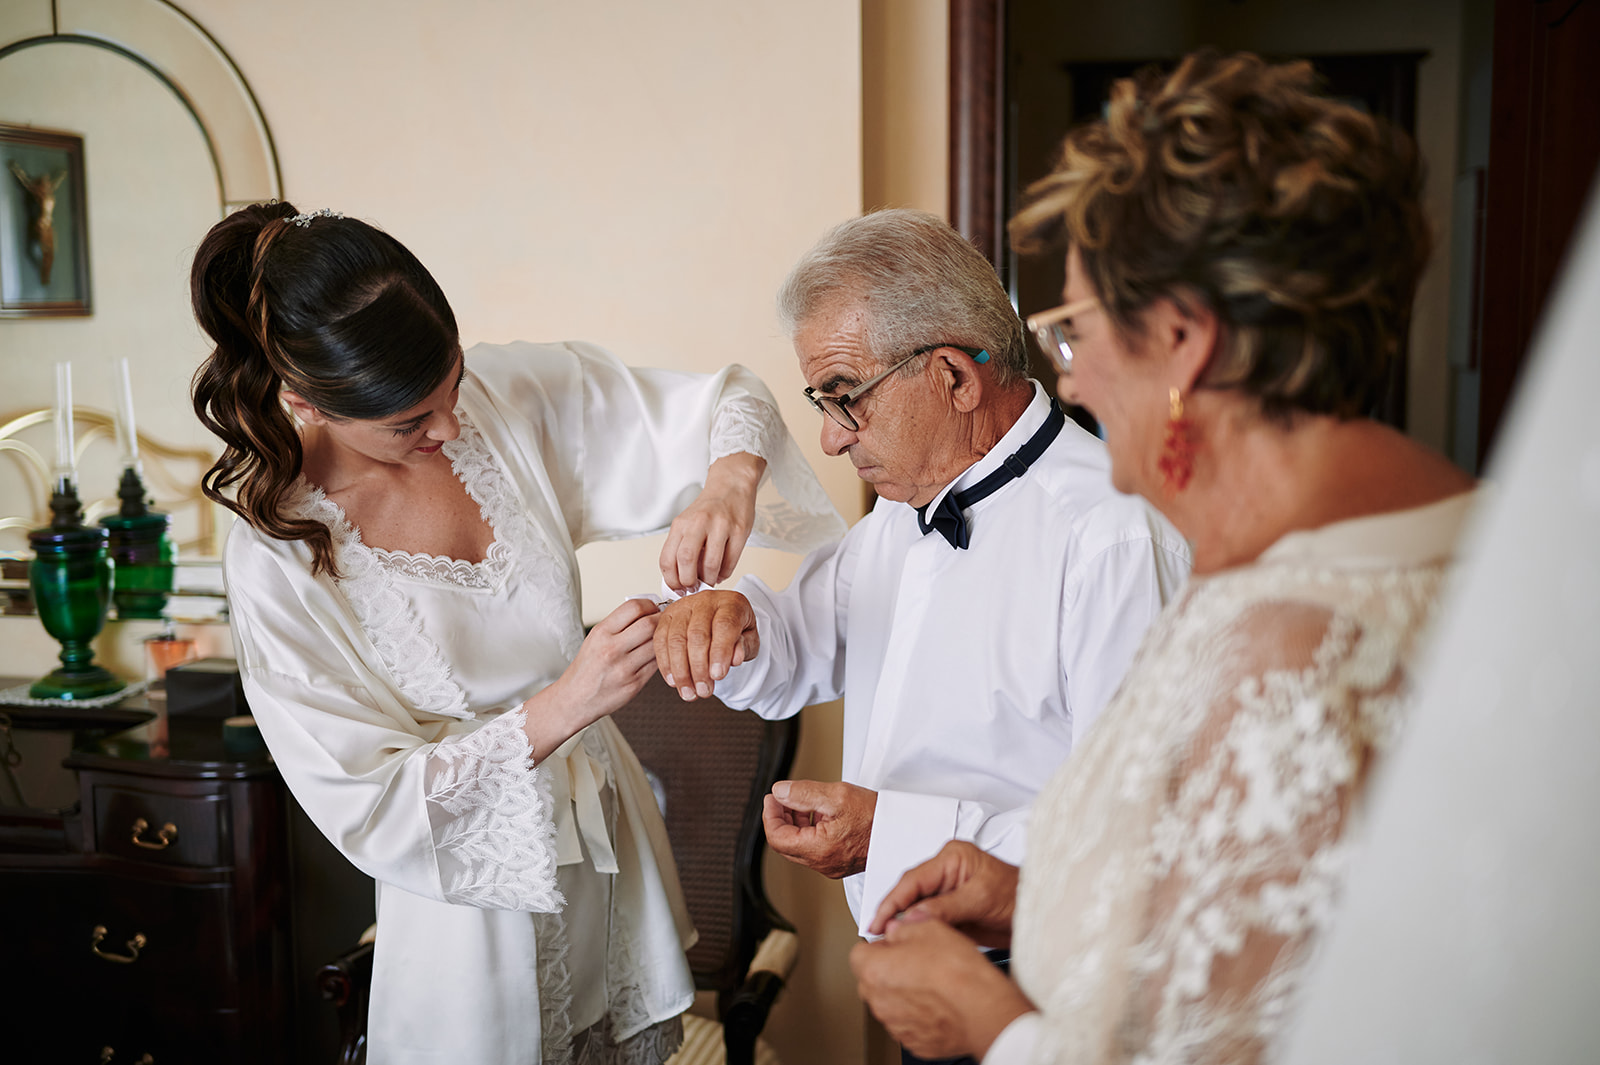 Relive the romance of Sicilian weddings through the lens of Emiliano Tidona Photographer